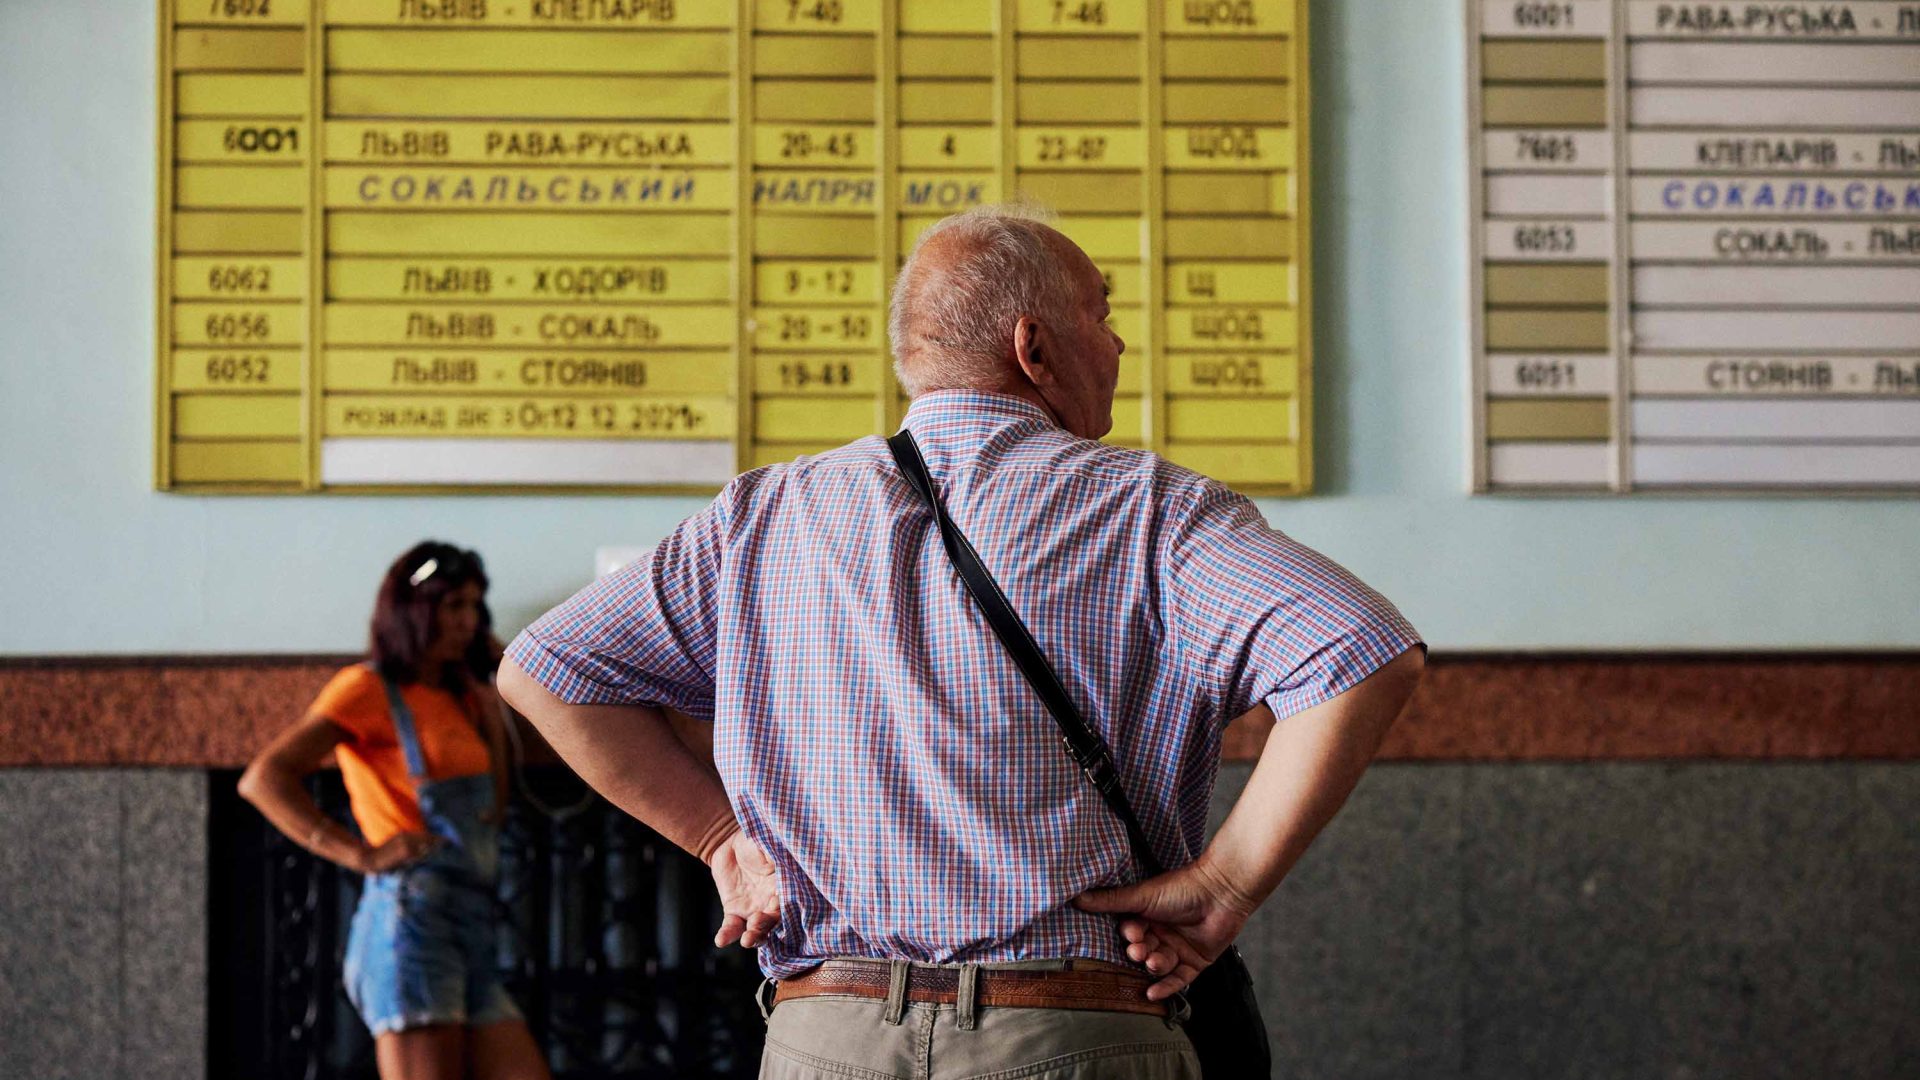 A man looks at a timetable